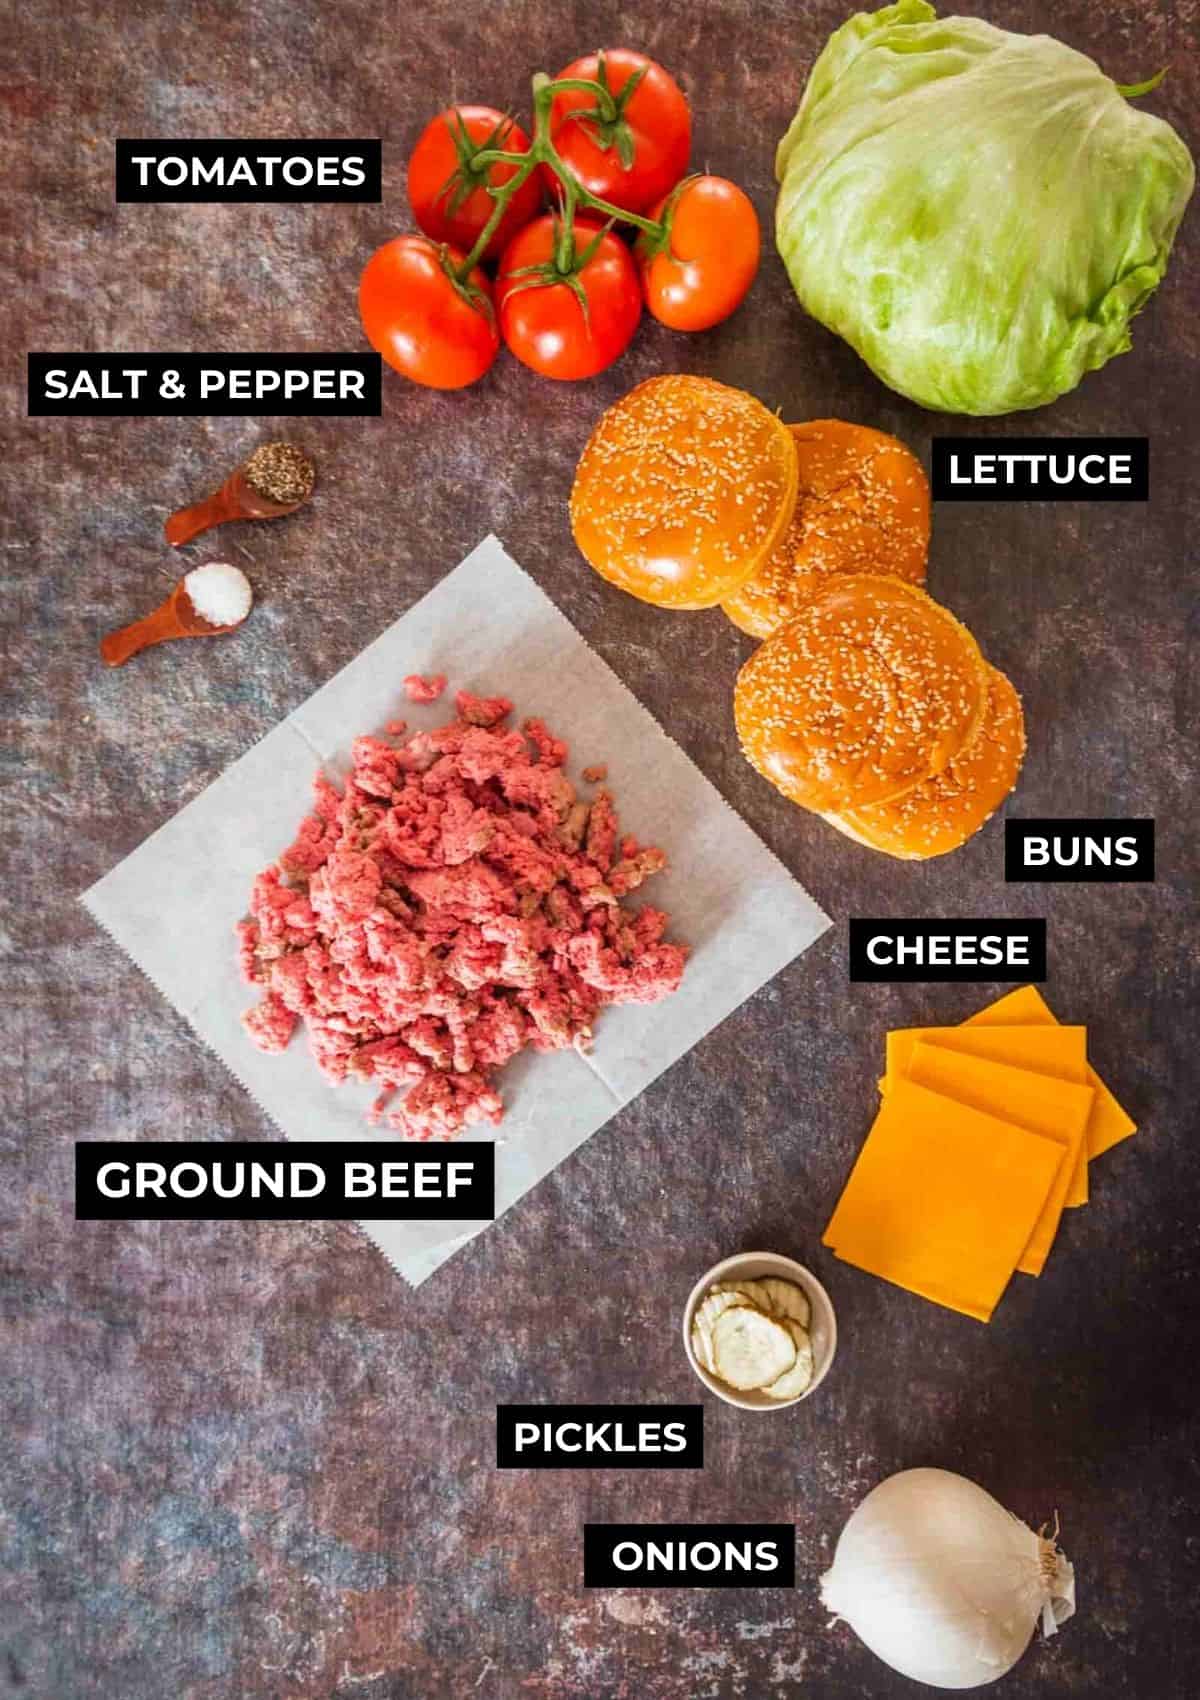 Ingredients for these burgers.